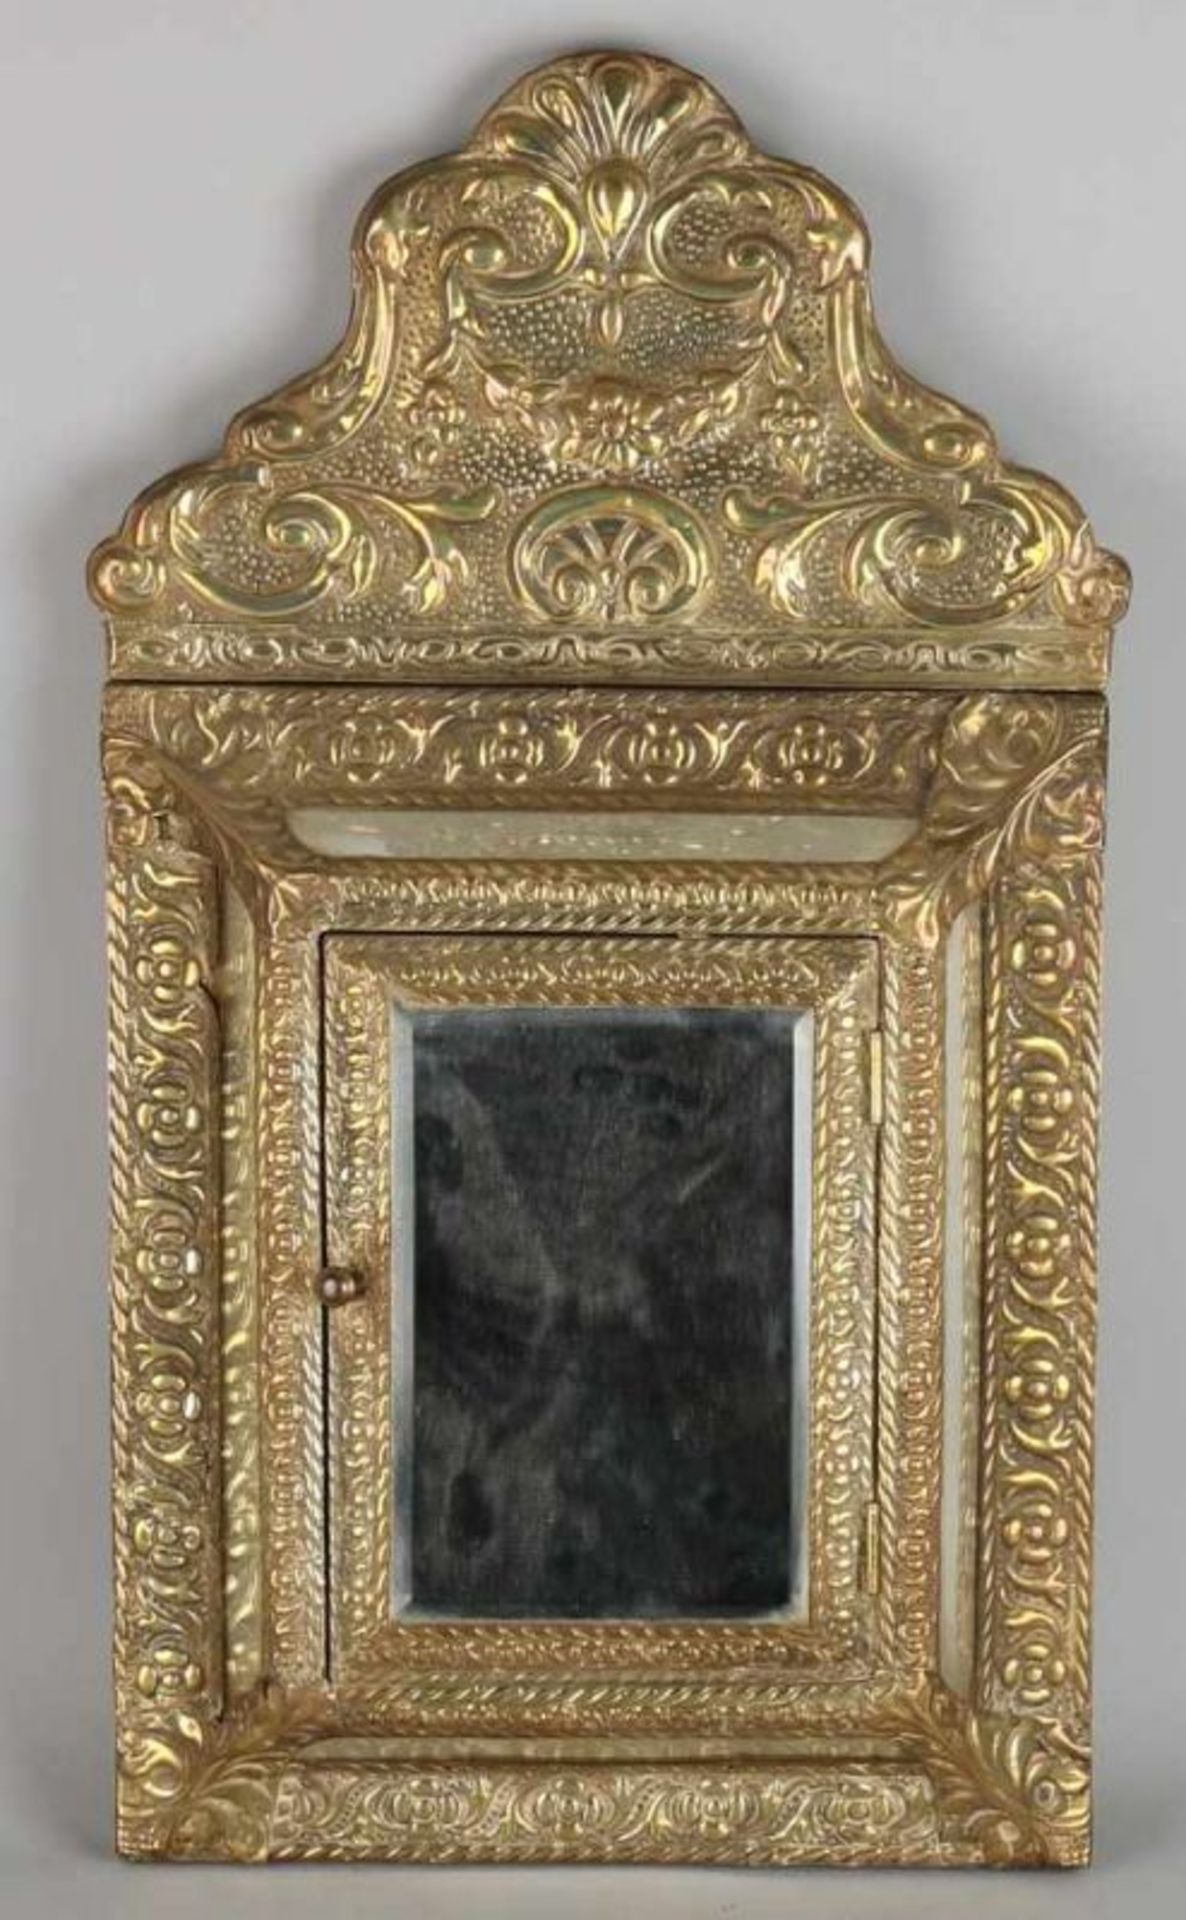 Antique brass brush with beaten mirror cabinet and two beaten brass brushes. Circa 1900. Size: 63